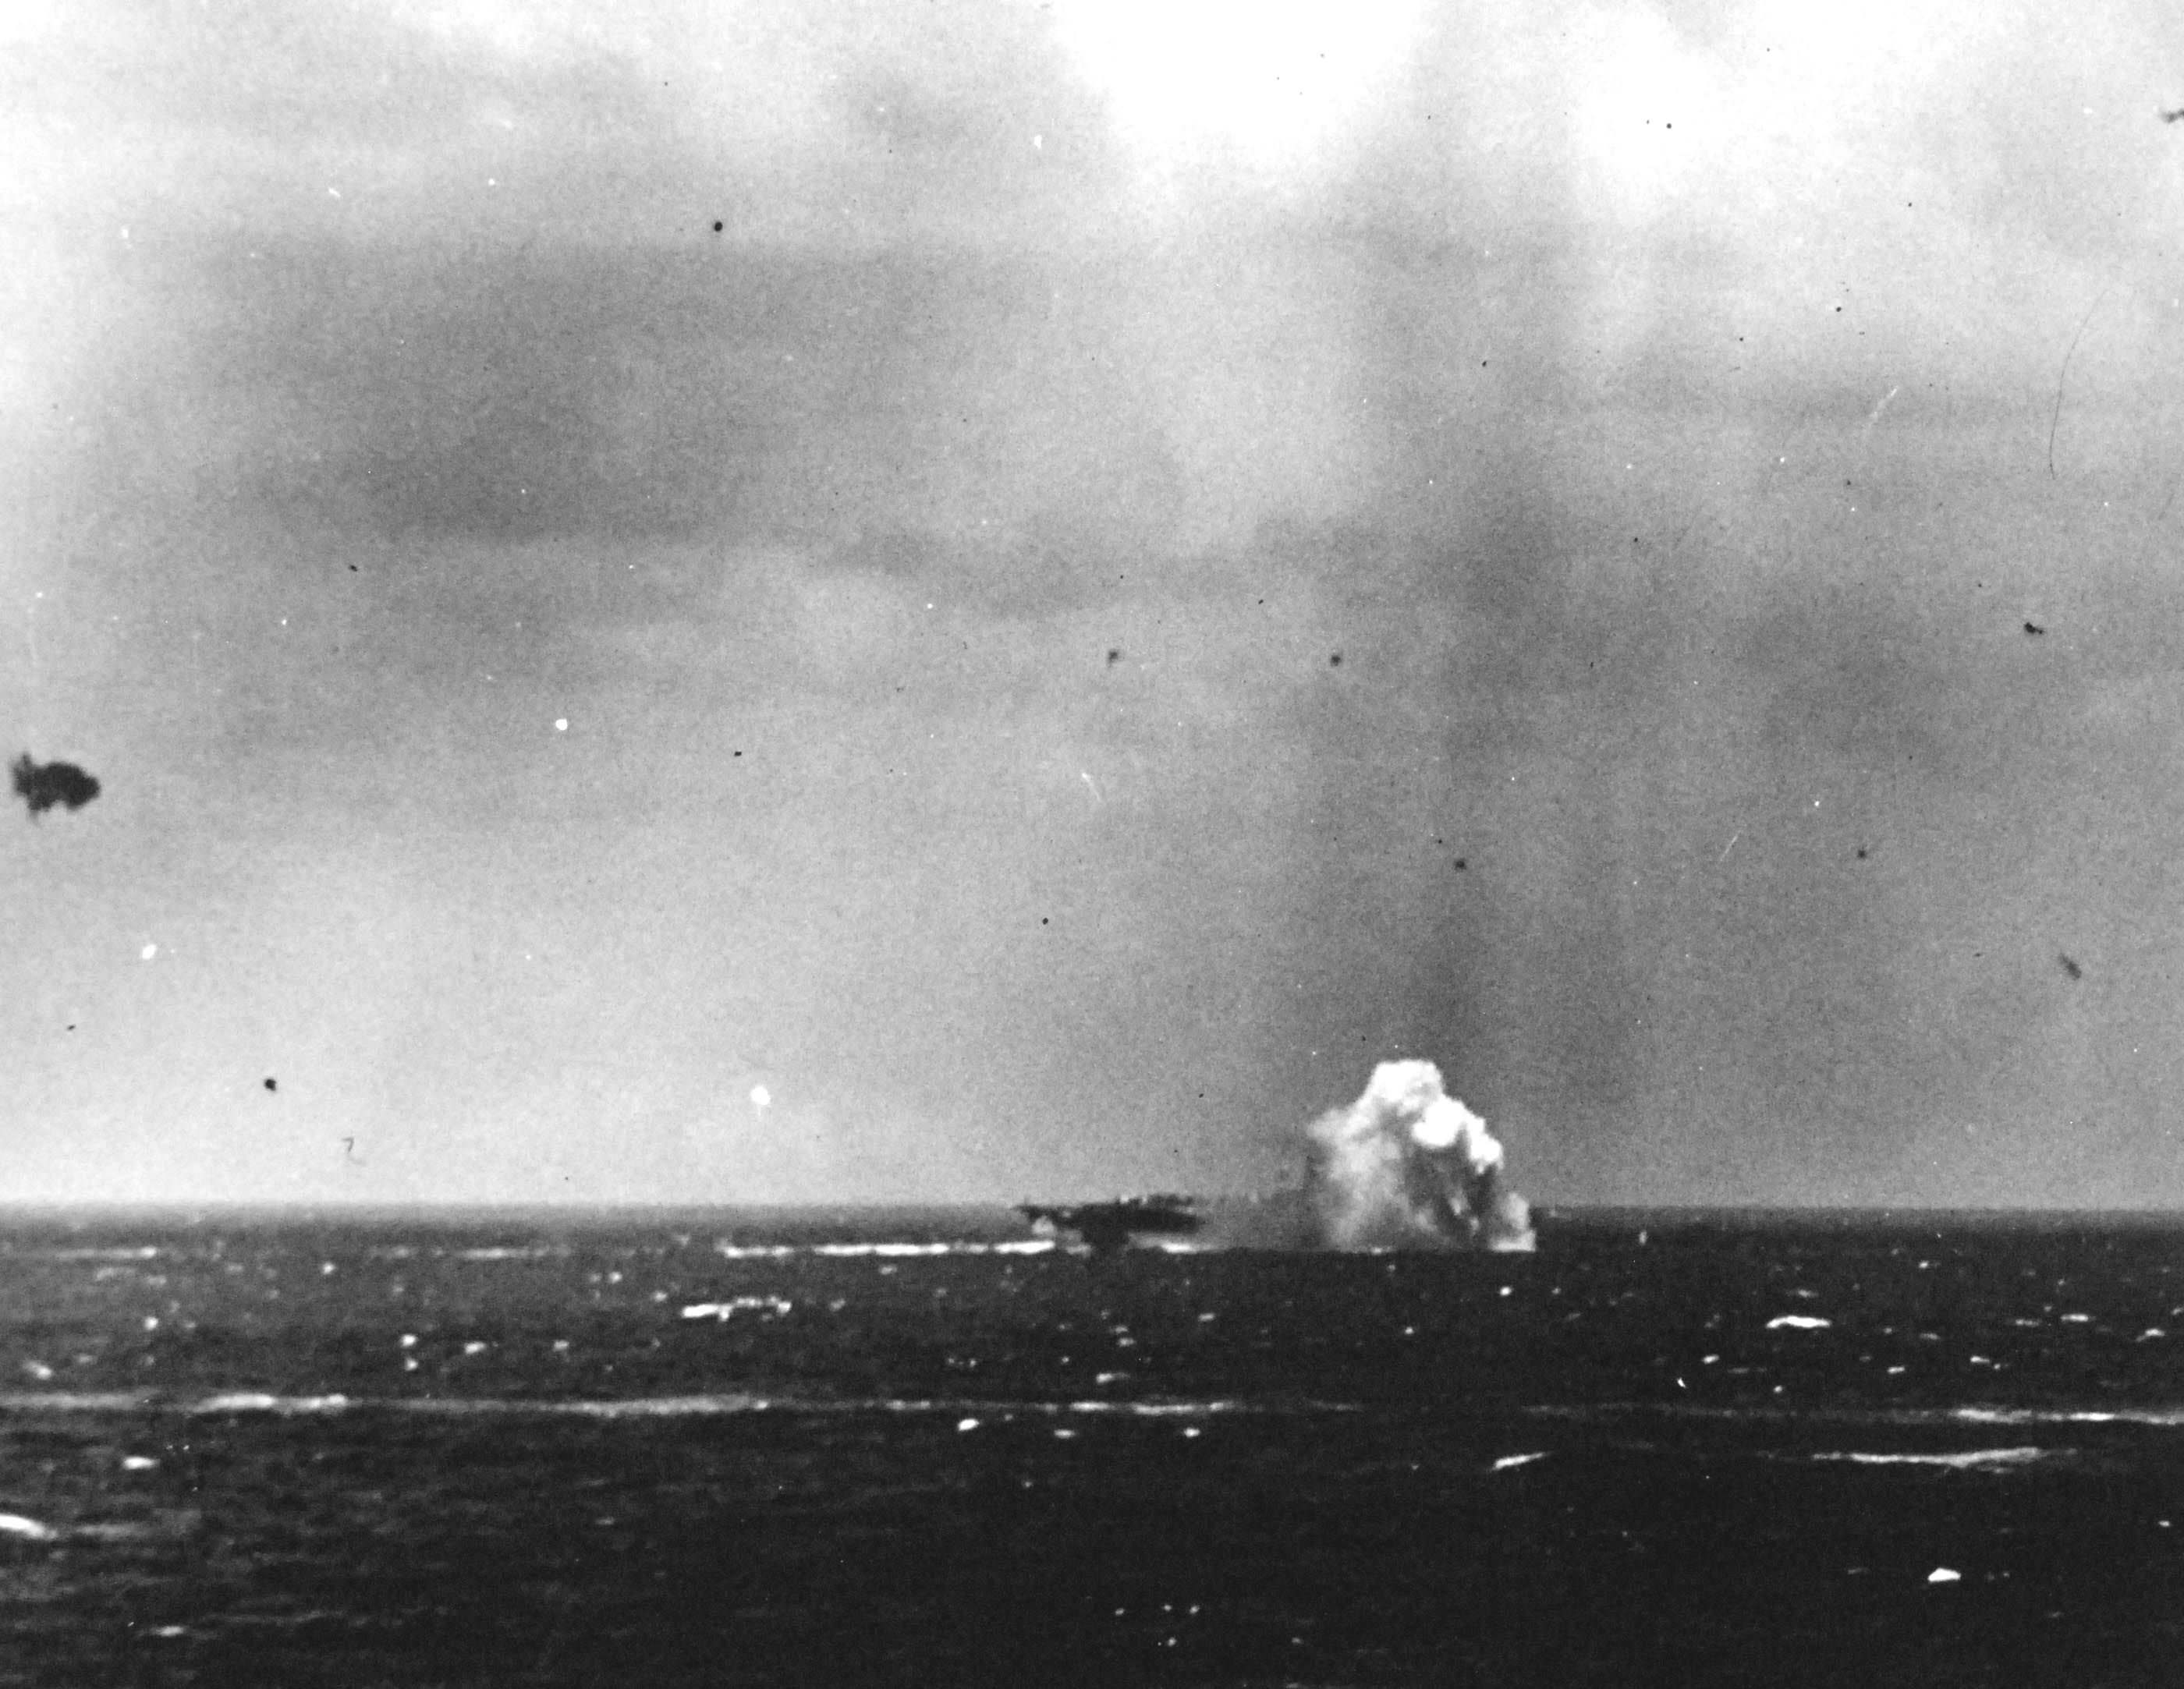 A Japanese special attack A6M aircraft crashing close aboard the starboard side of the carrier Ticonderoga off the Philippines, 5 Nov 1944. Photo 2 of 3.